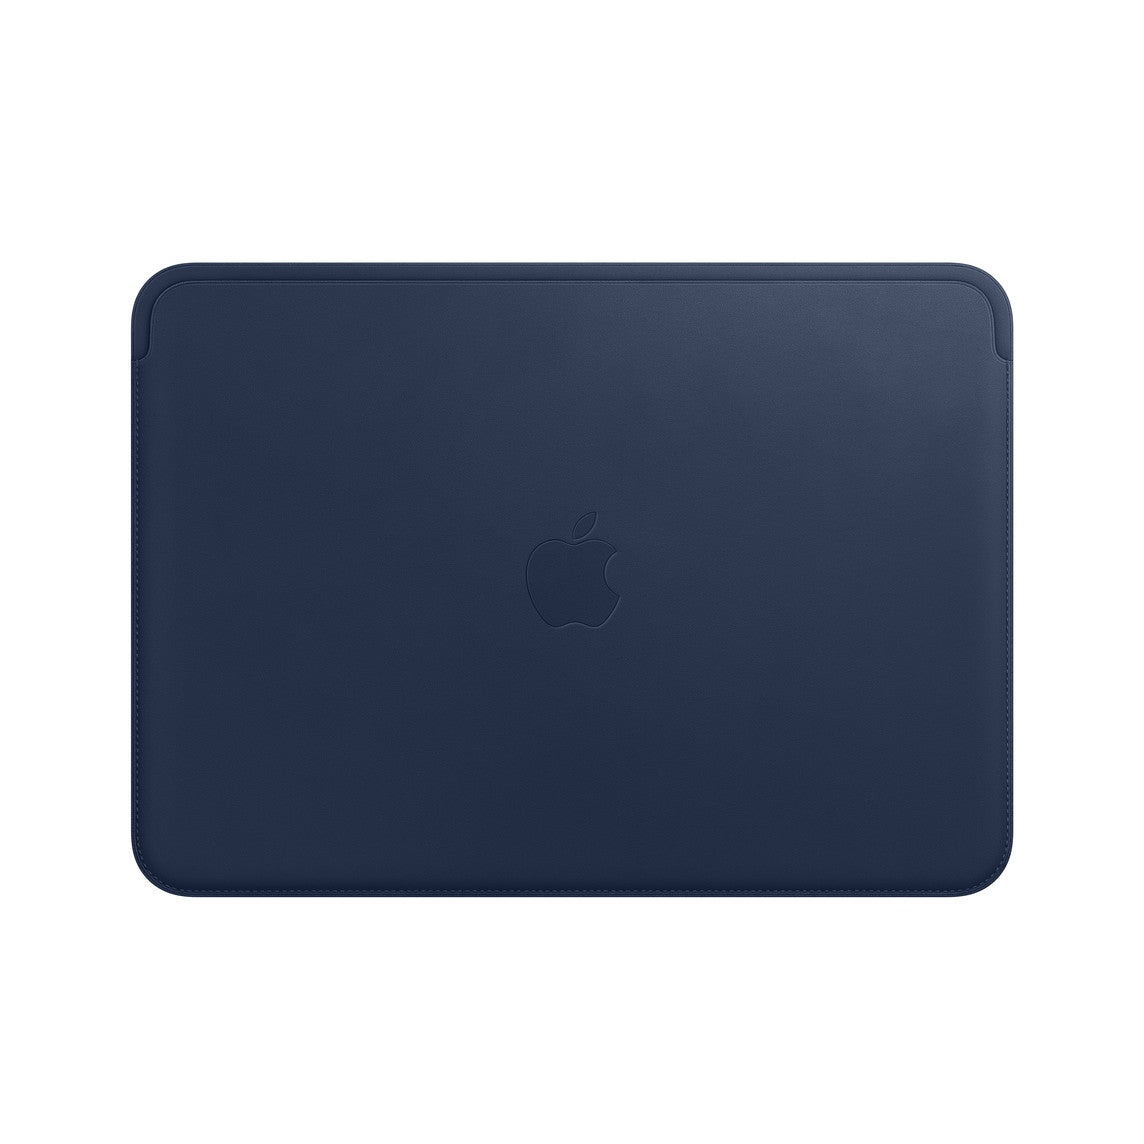 Macbook 16 inch Leather Sleeve Midnight Blue Midnight Blue New - Sealed